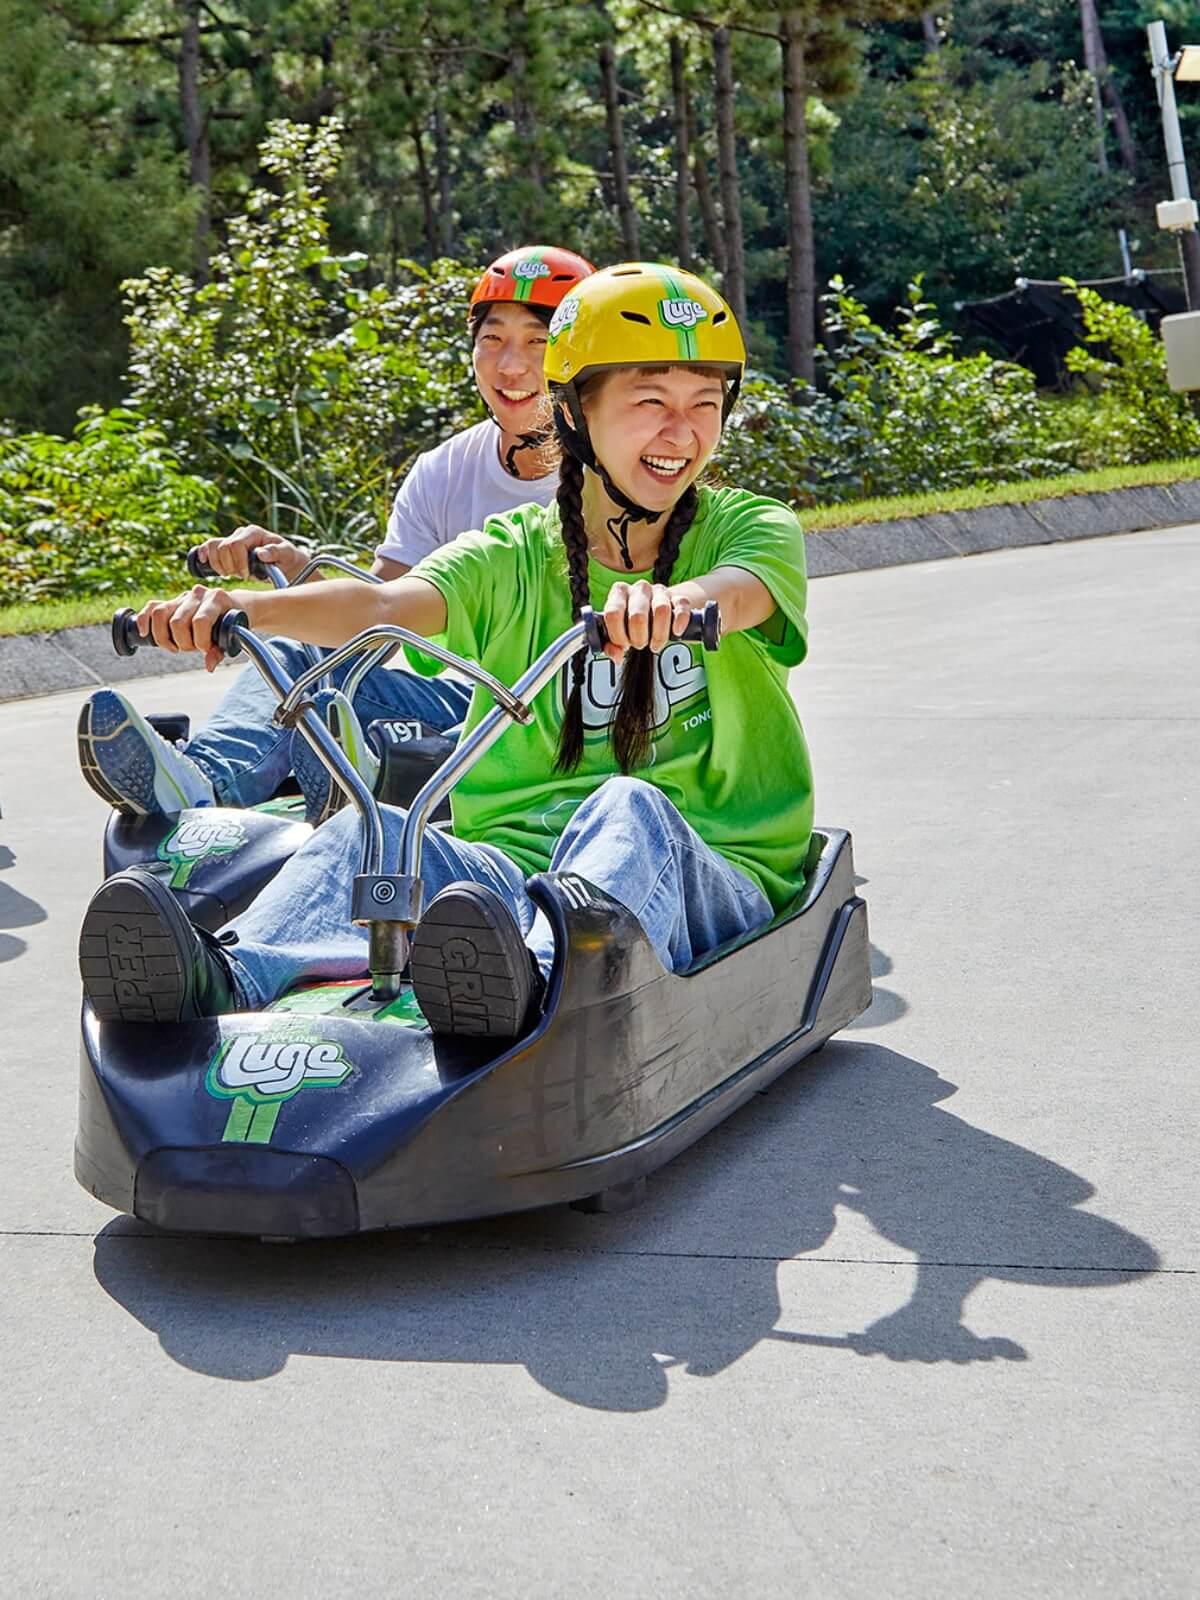 A lady smiles widely as she leads the race down the Luge tracks at Skyline Luge Tongyeong.